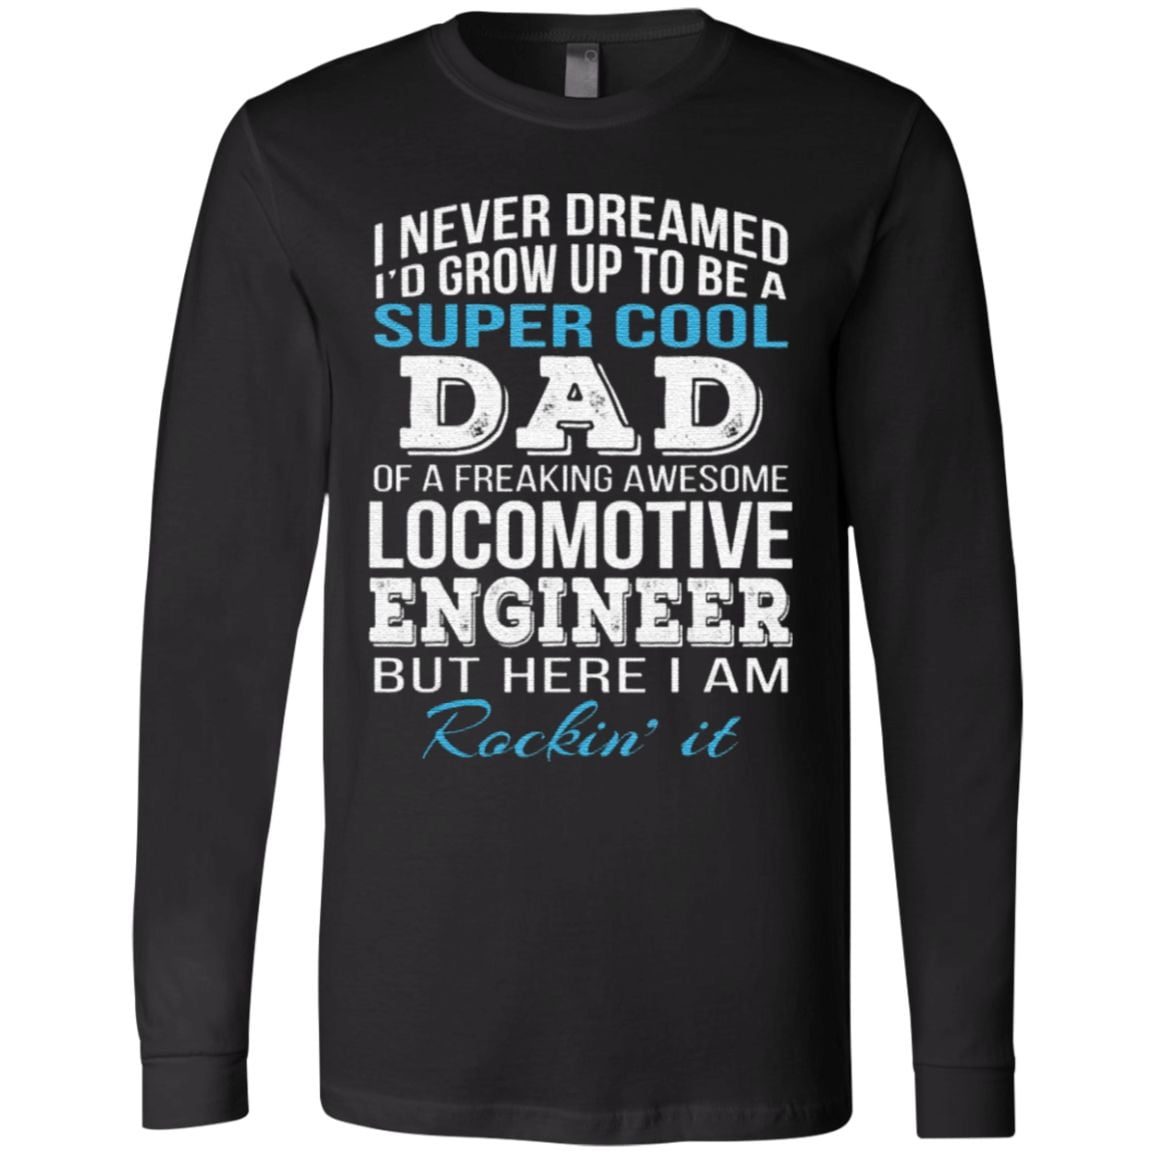 I never dreamed i’d grow up to be a super cool dad t shirt